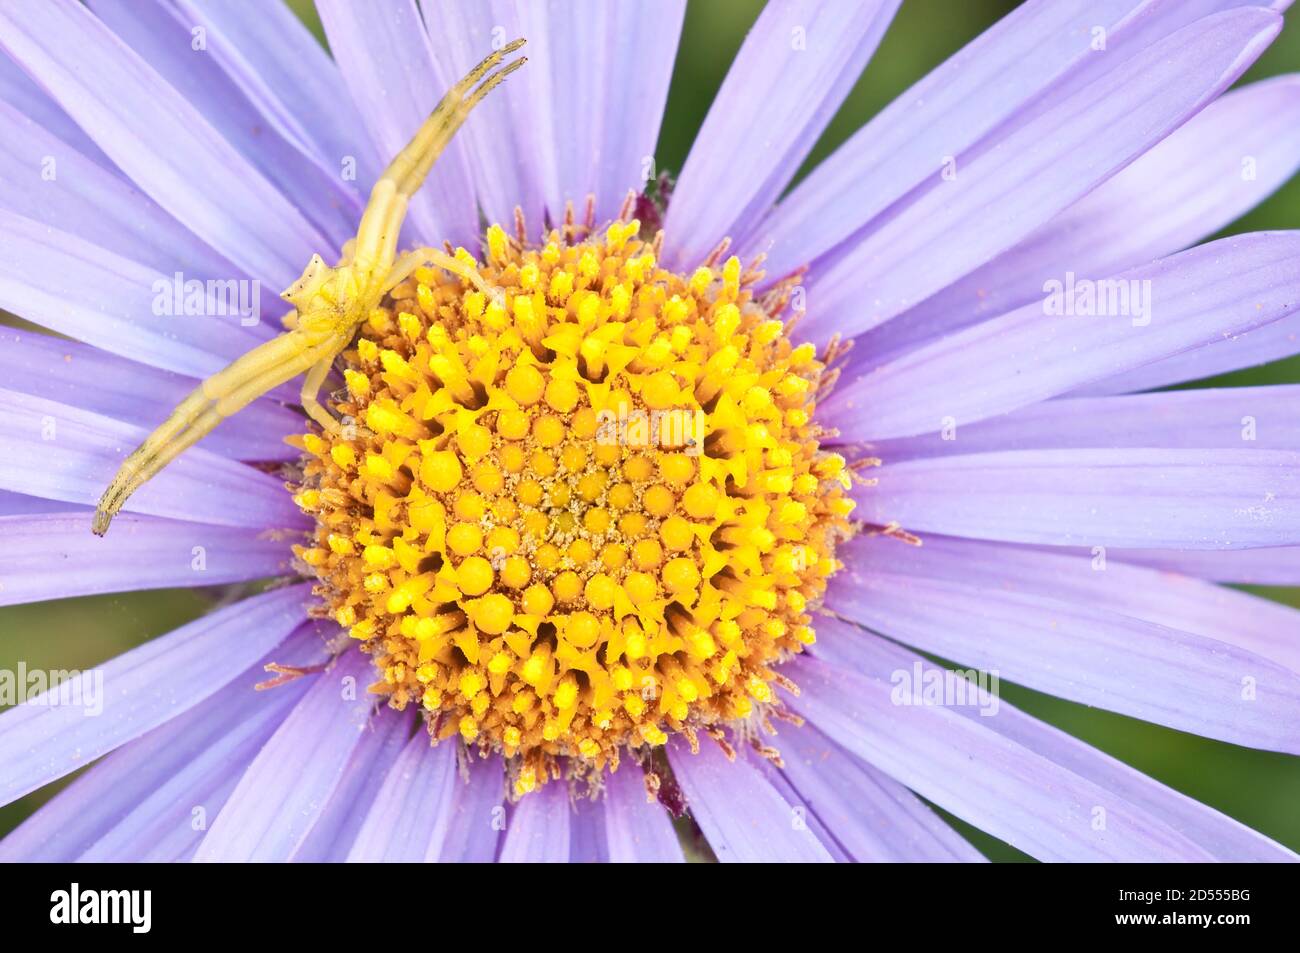 Crab spider in hunt posture on purple and yellow anemone flower Stock Photo